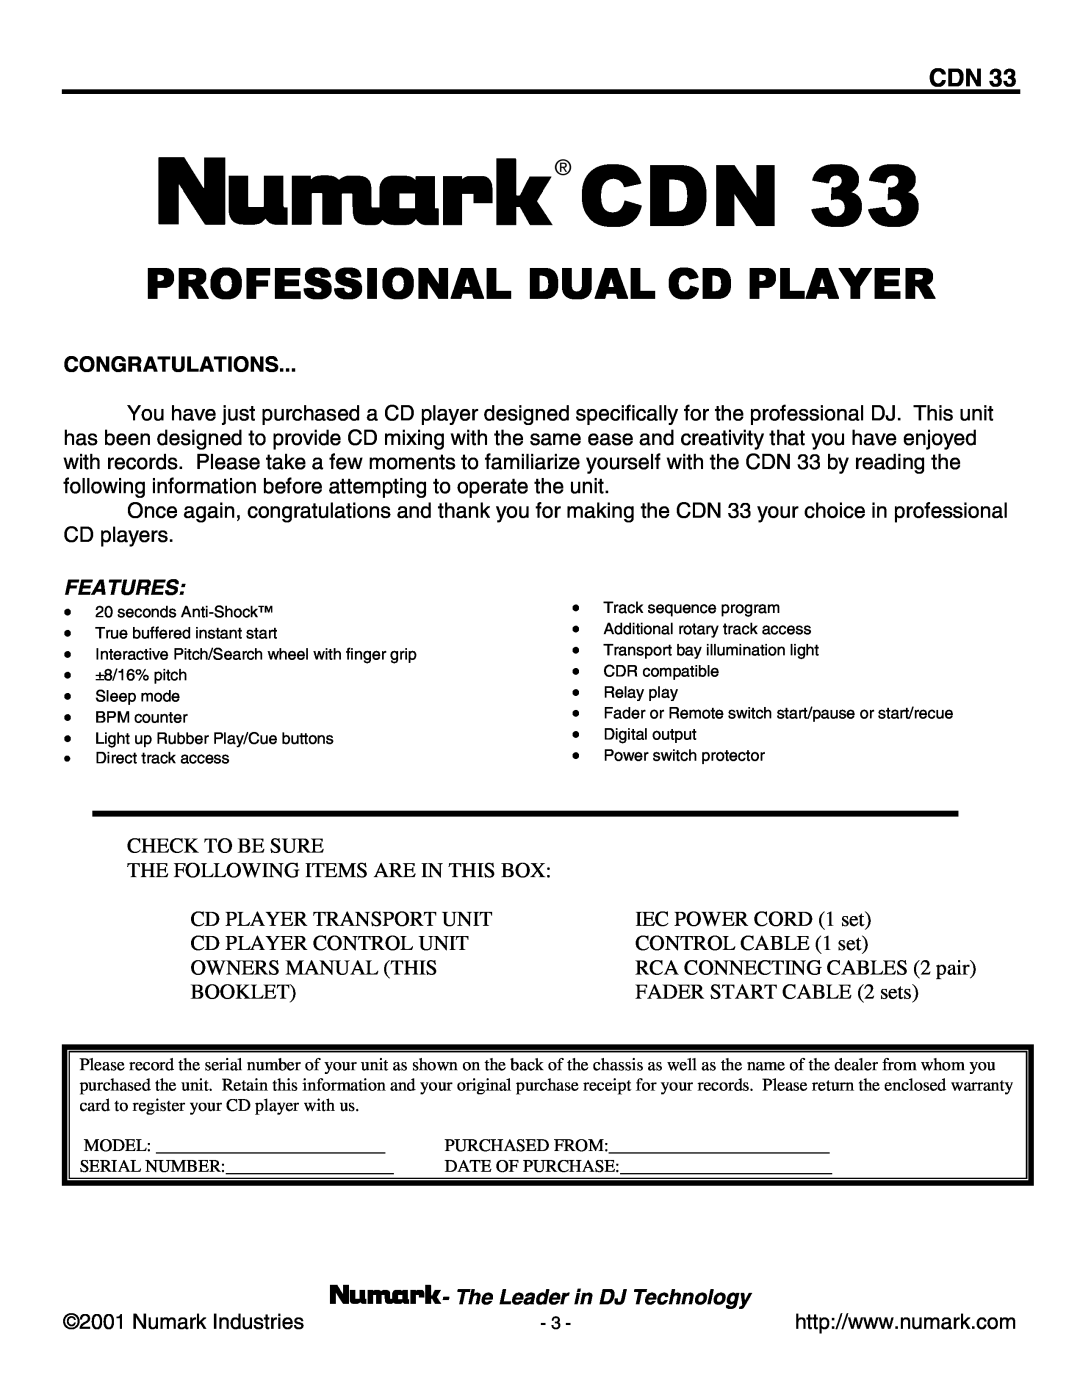 Numark Industries CDN 33 manual Professional Dual Cd Player, Congratulations, Features, Check To Be Sure, Numark Industries 